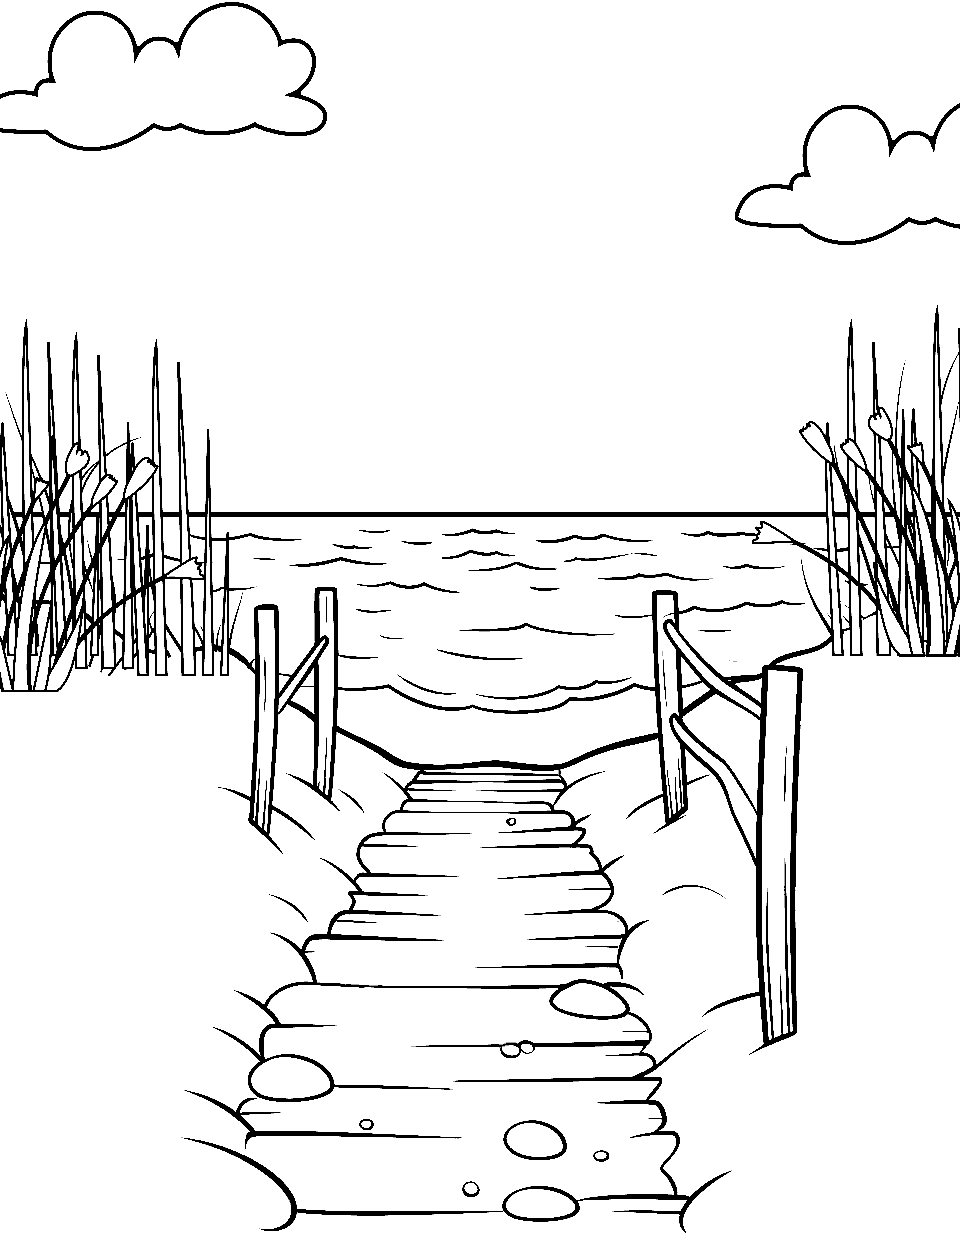 Sandy Beach Pathway Ocean Coloring Page - A pathway leading through the sand to the ocean.